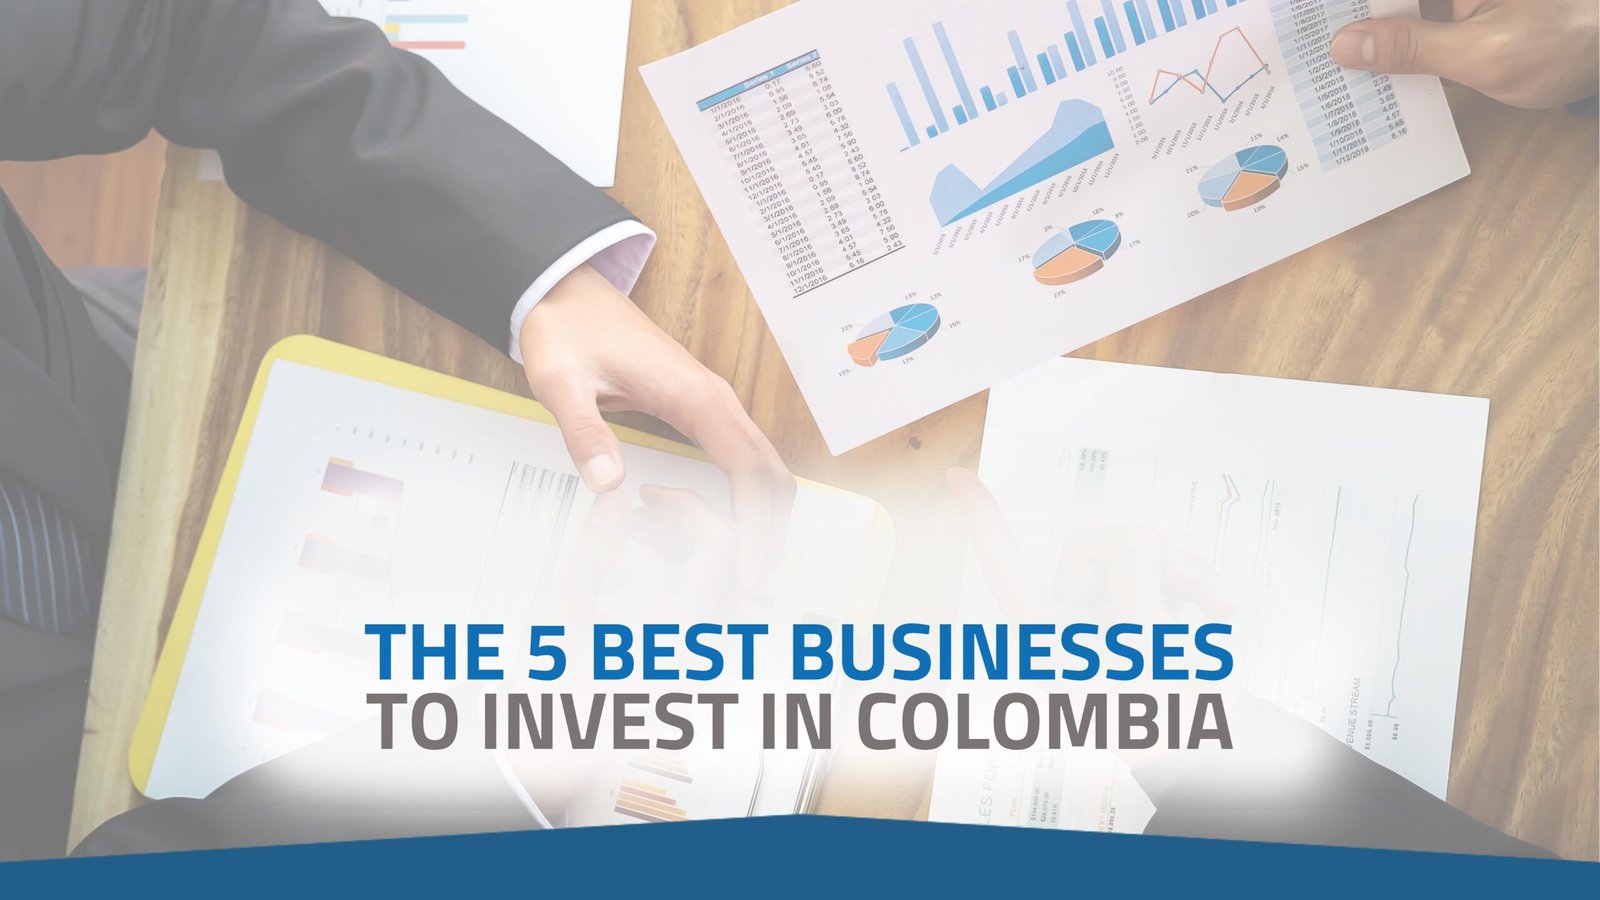 The five best businesses to invest in Colombia in 2022